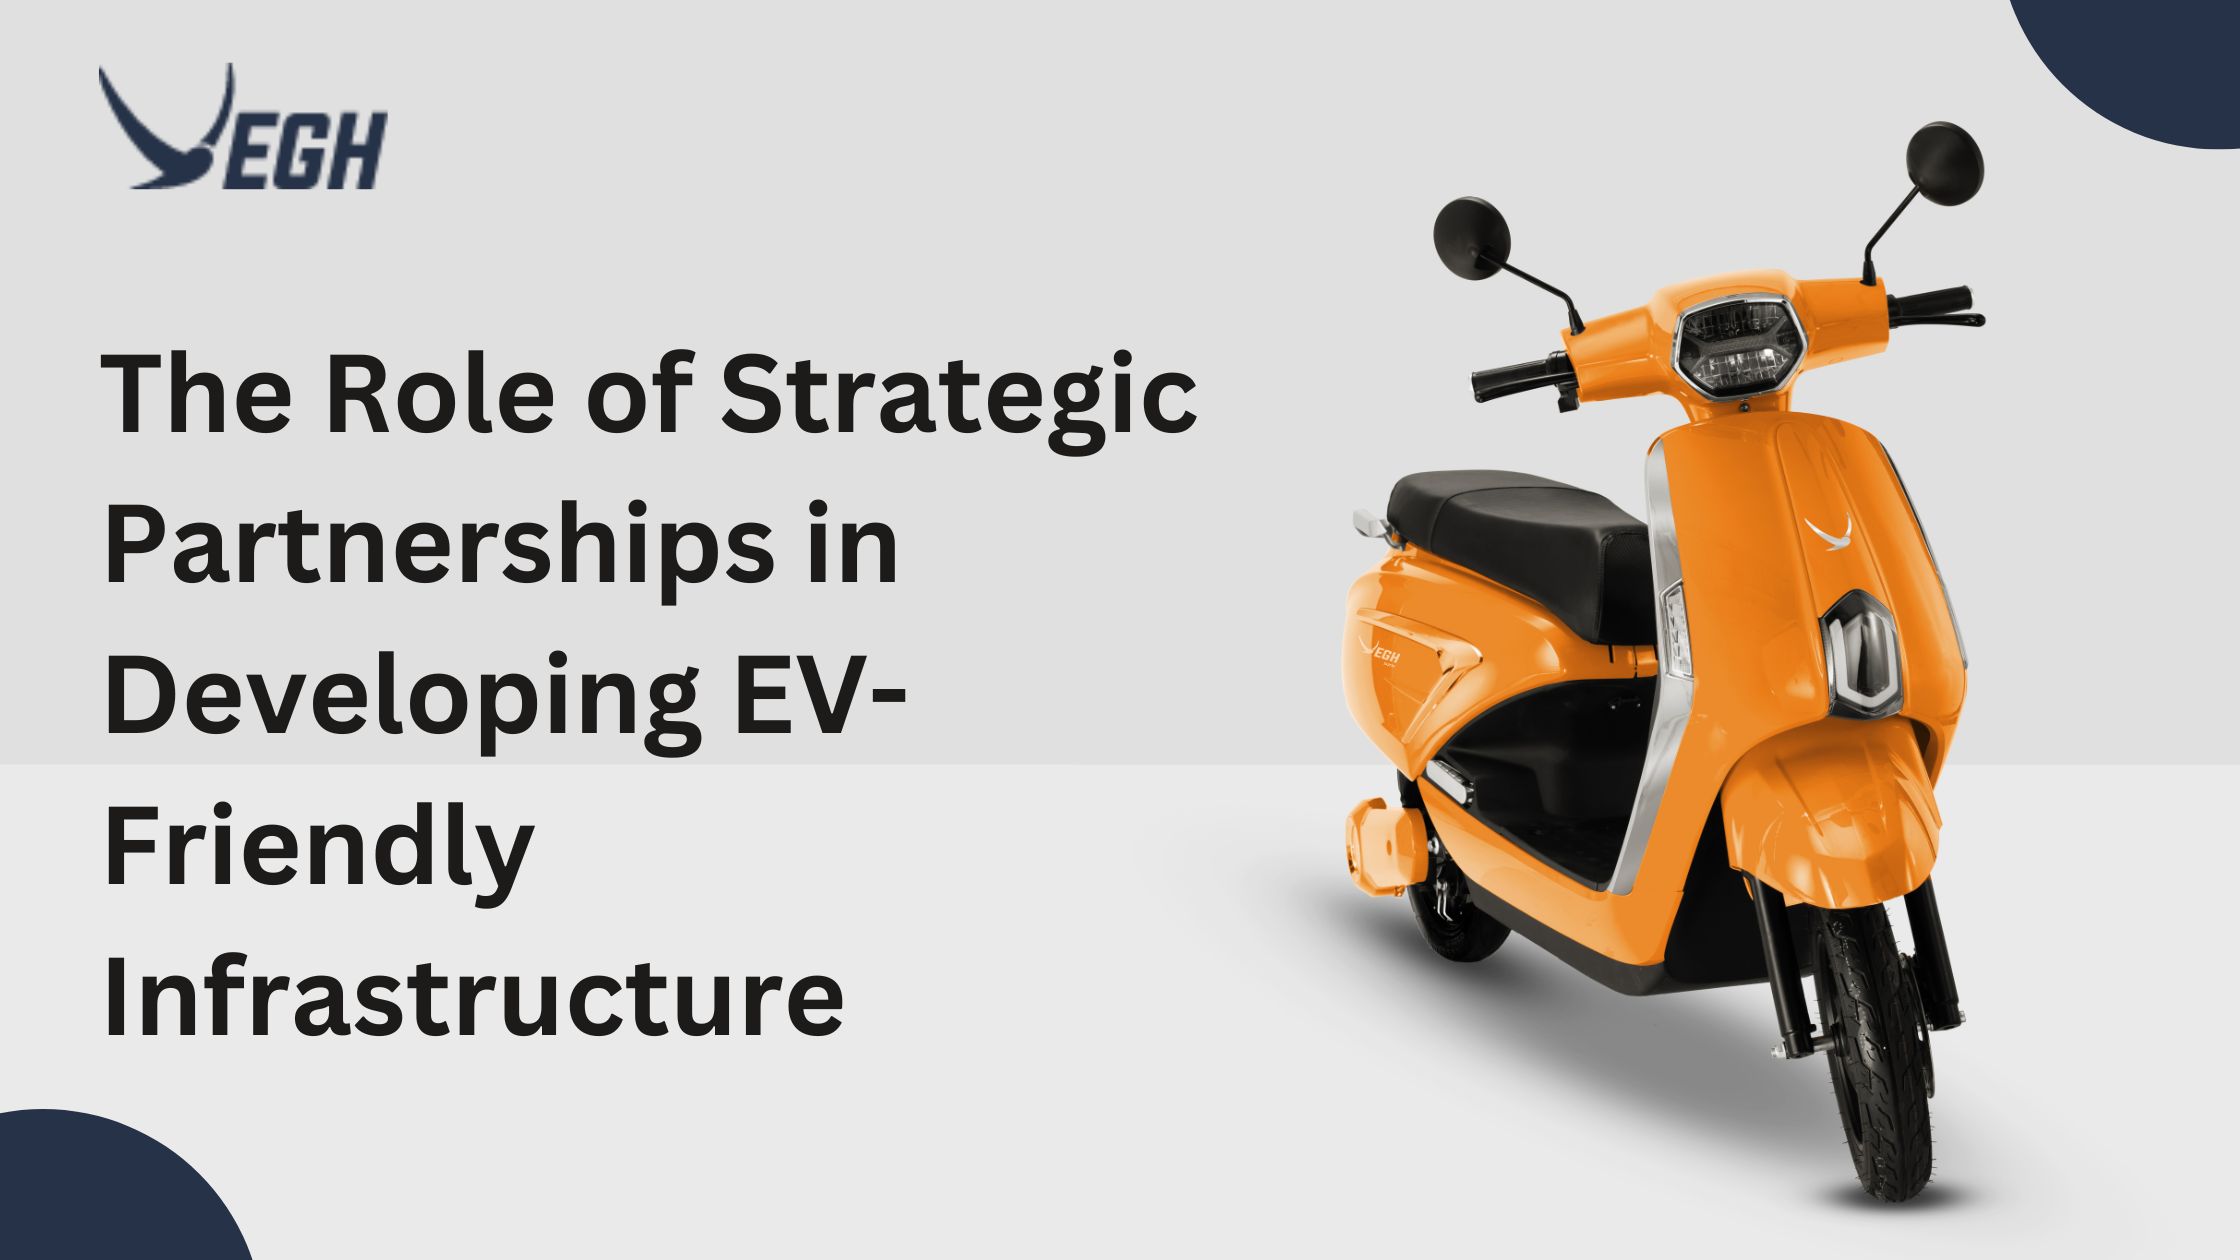 The role of strategic partnerships in developing EV-friendly infrastructure